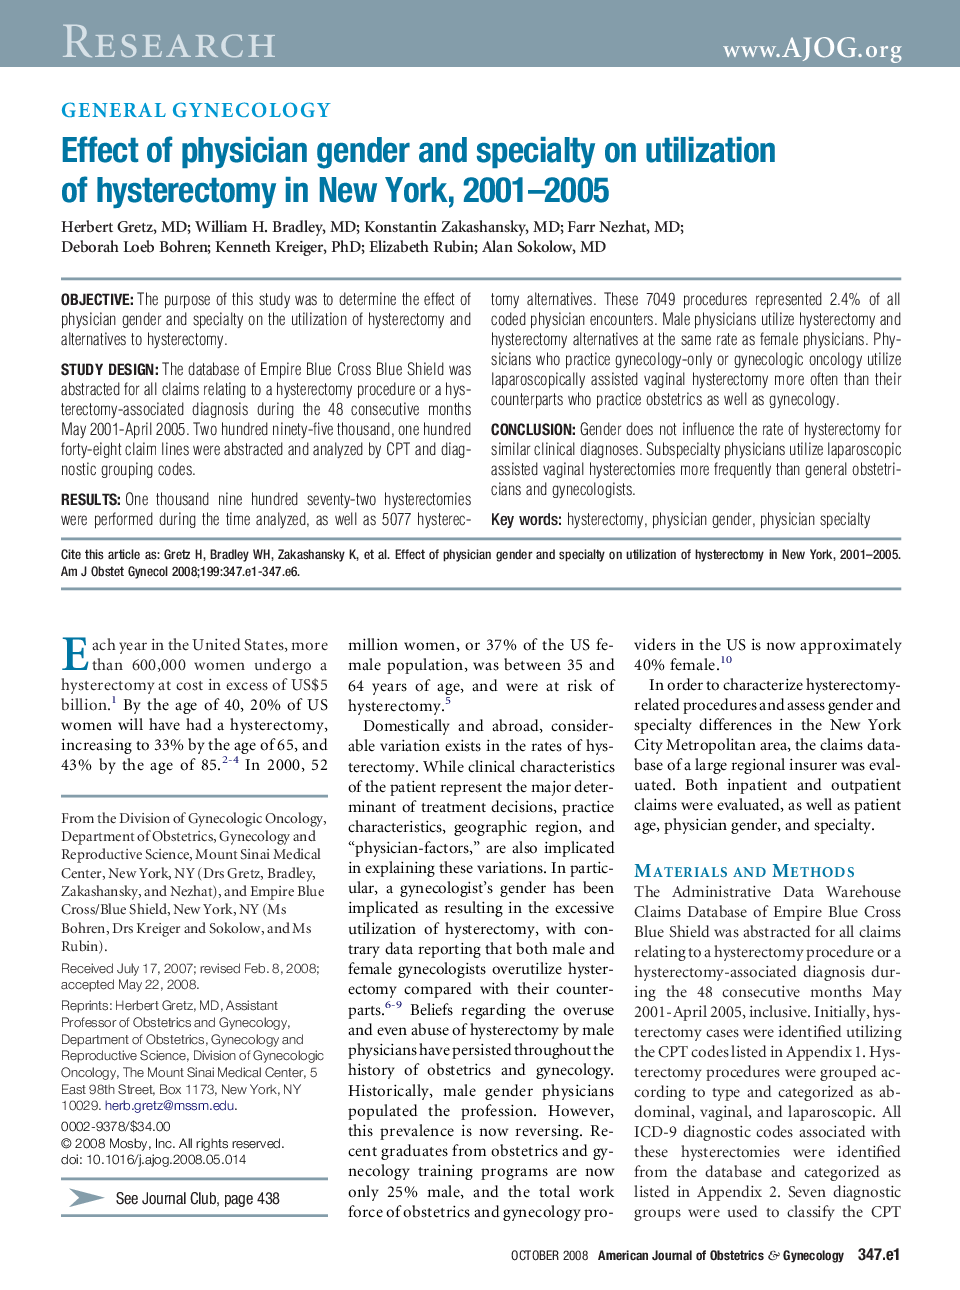 Effect of physician gender and specialty on utilization of hysterectomy in New York, 2001-2005